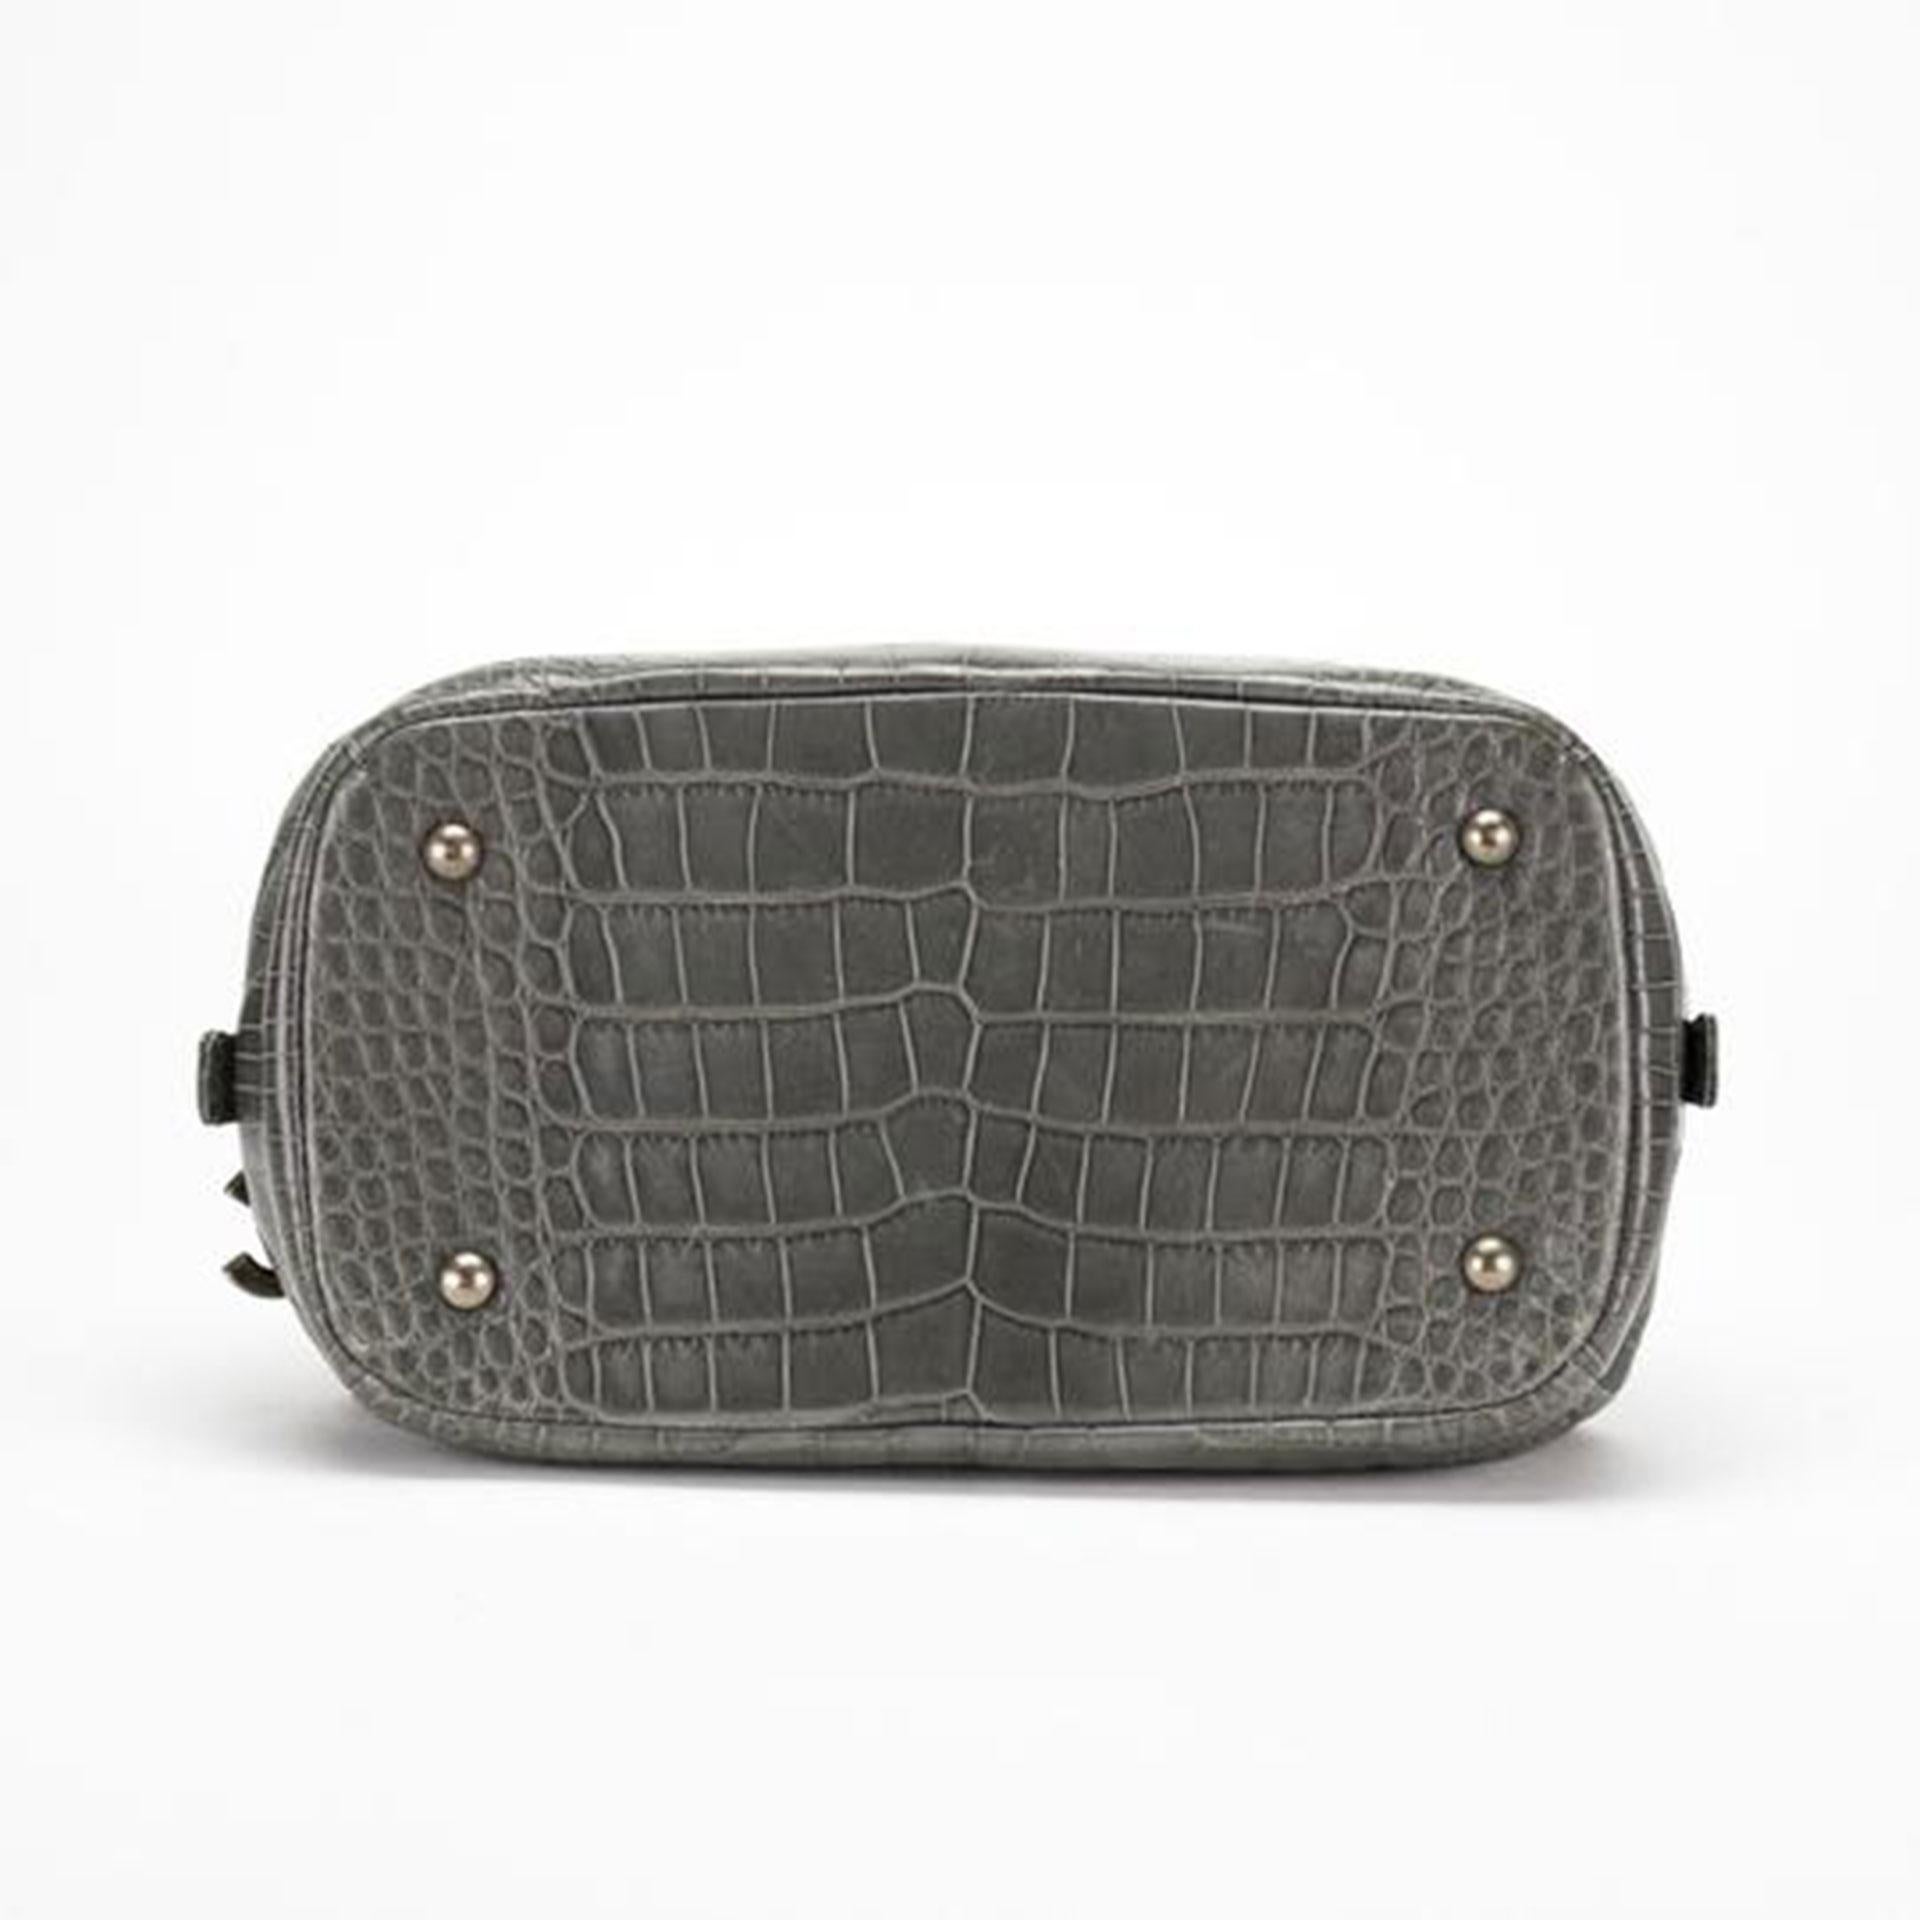 Chanel Bowling Bag Exotic Bowler Paris NY Grey Crocodile Skin Leather Satchel For Sale 4